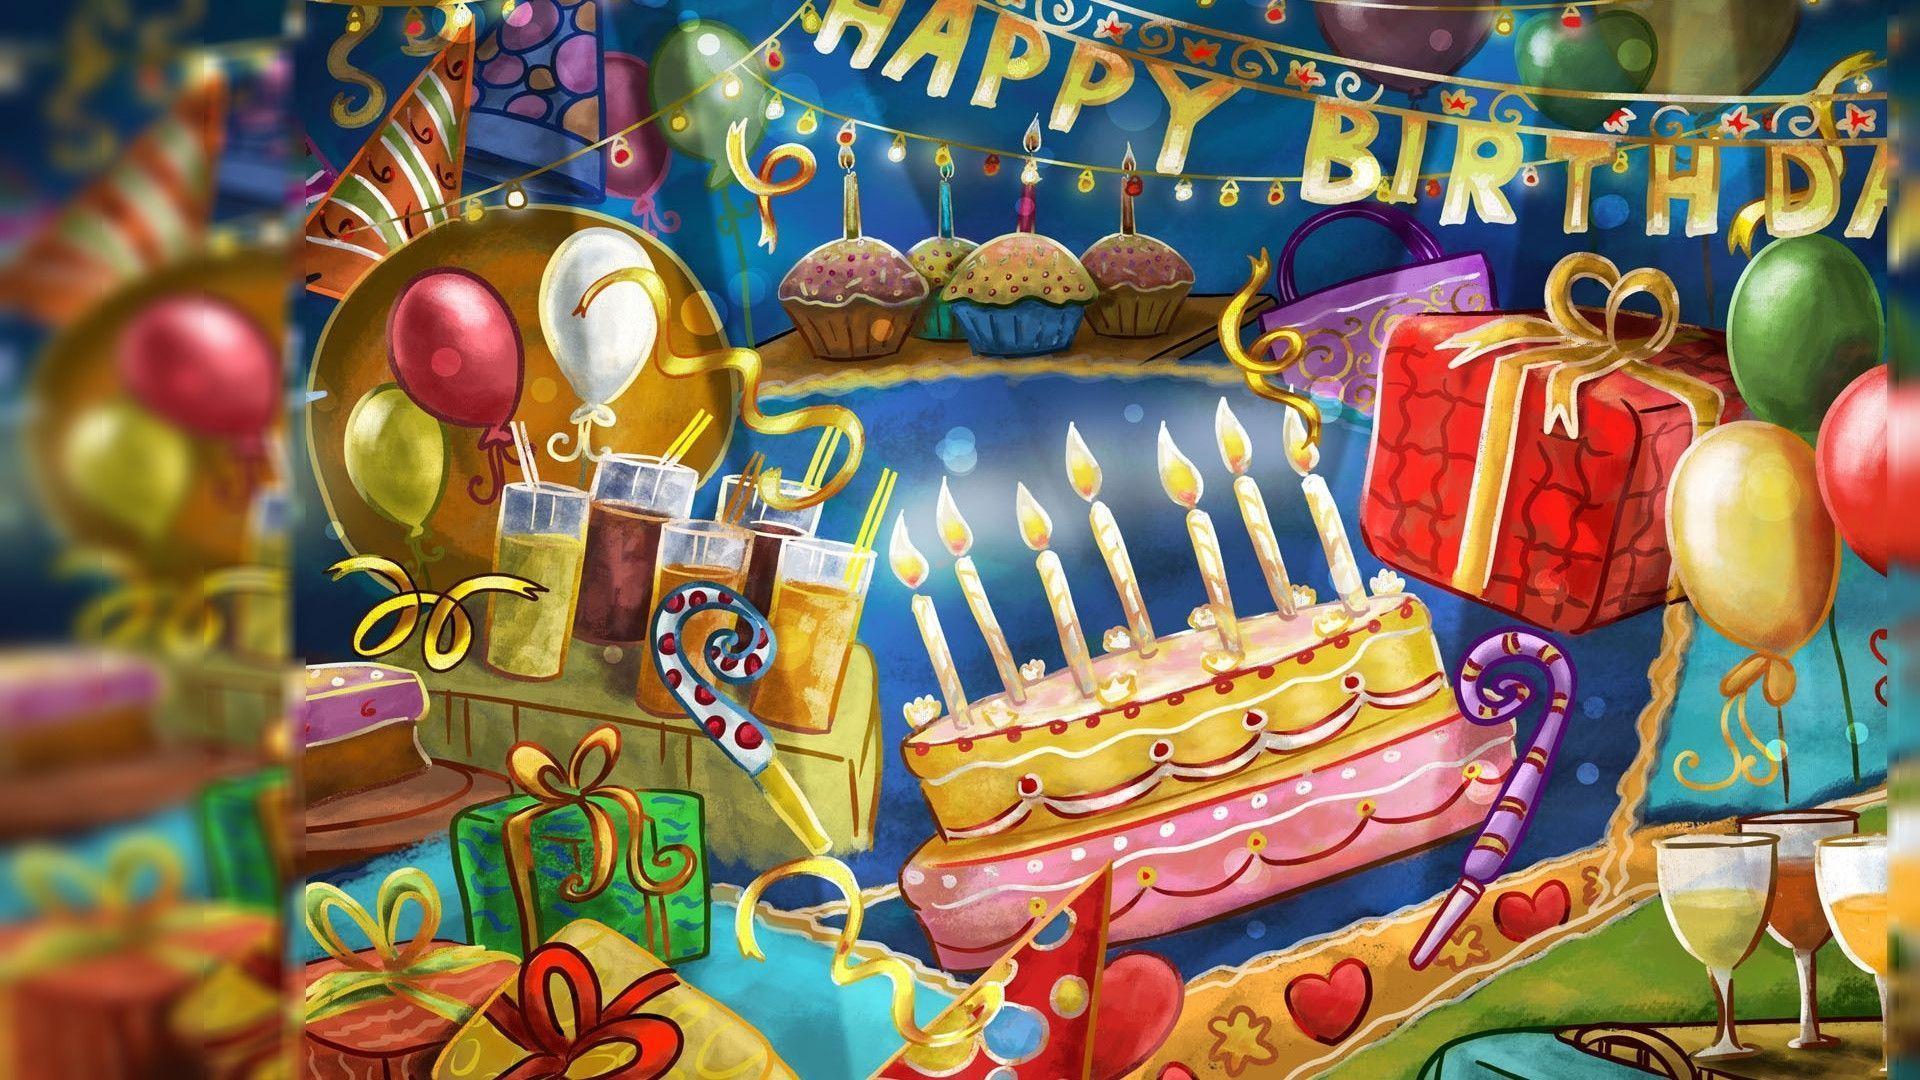 Beautiful happy Birthday images HD for whatsapp free download